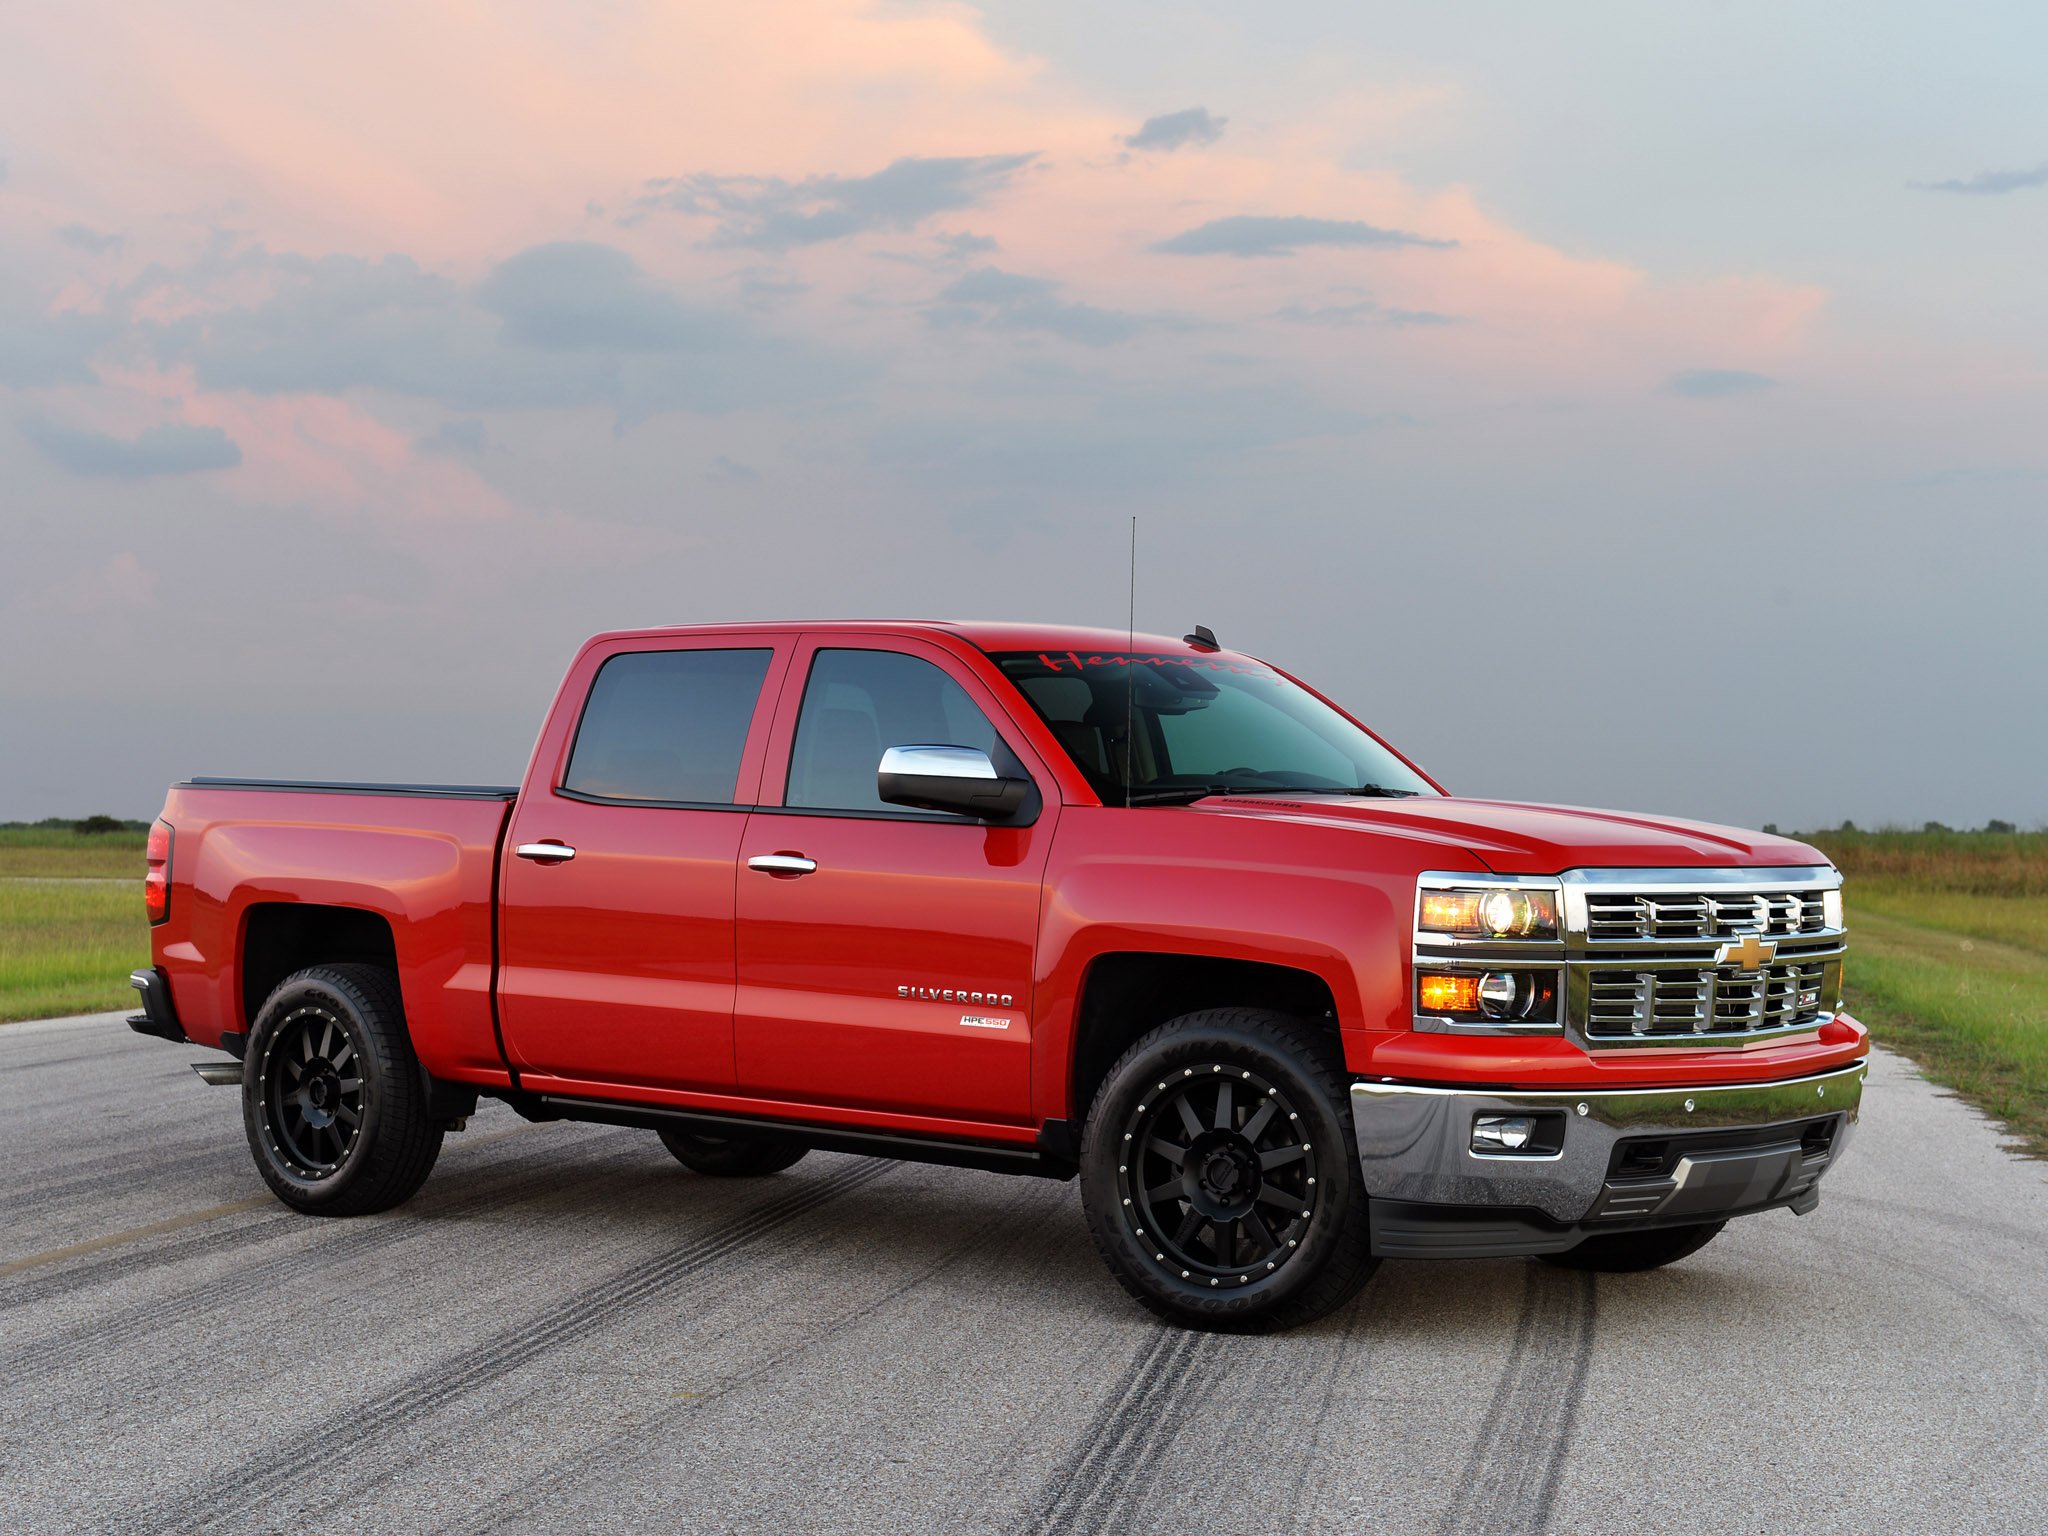 2014, Hennessey, Chevrolet, Silverado, Hpe550, Pick up, Supercharger Wallpaper